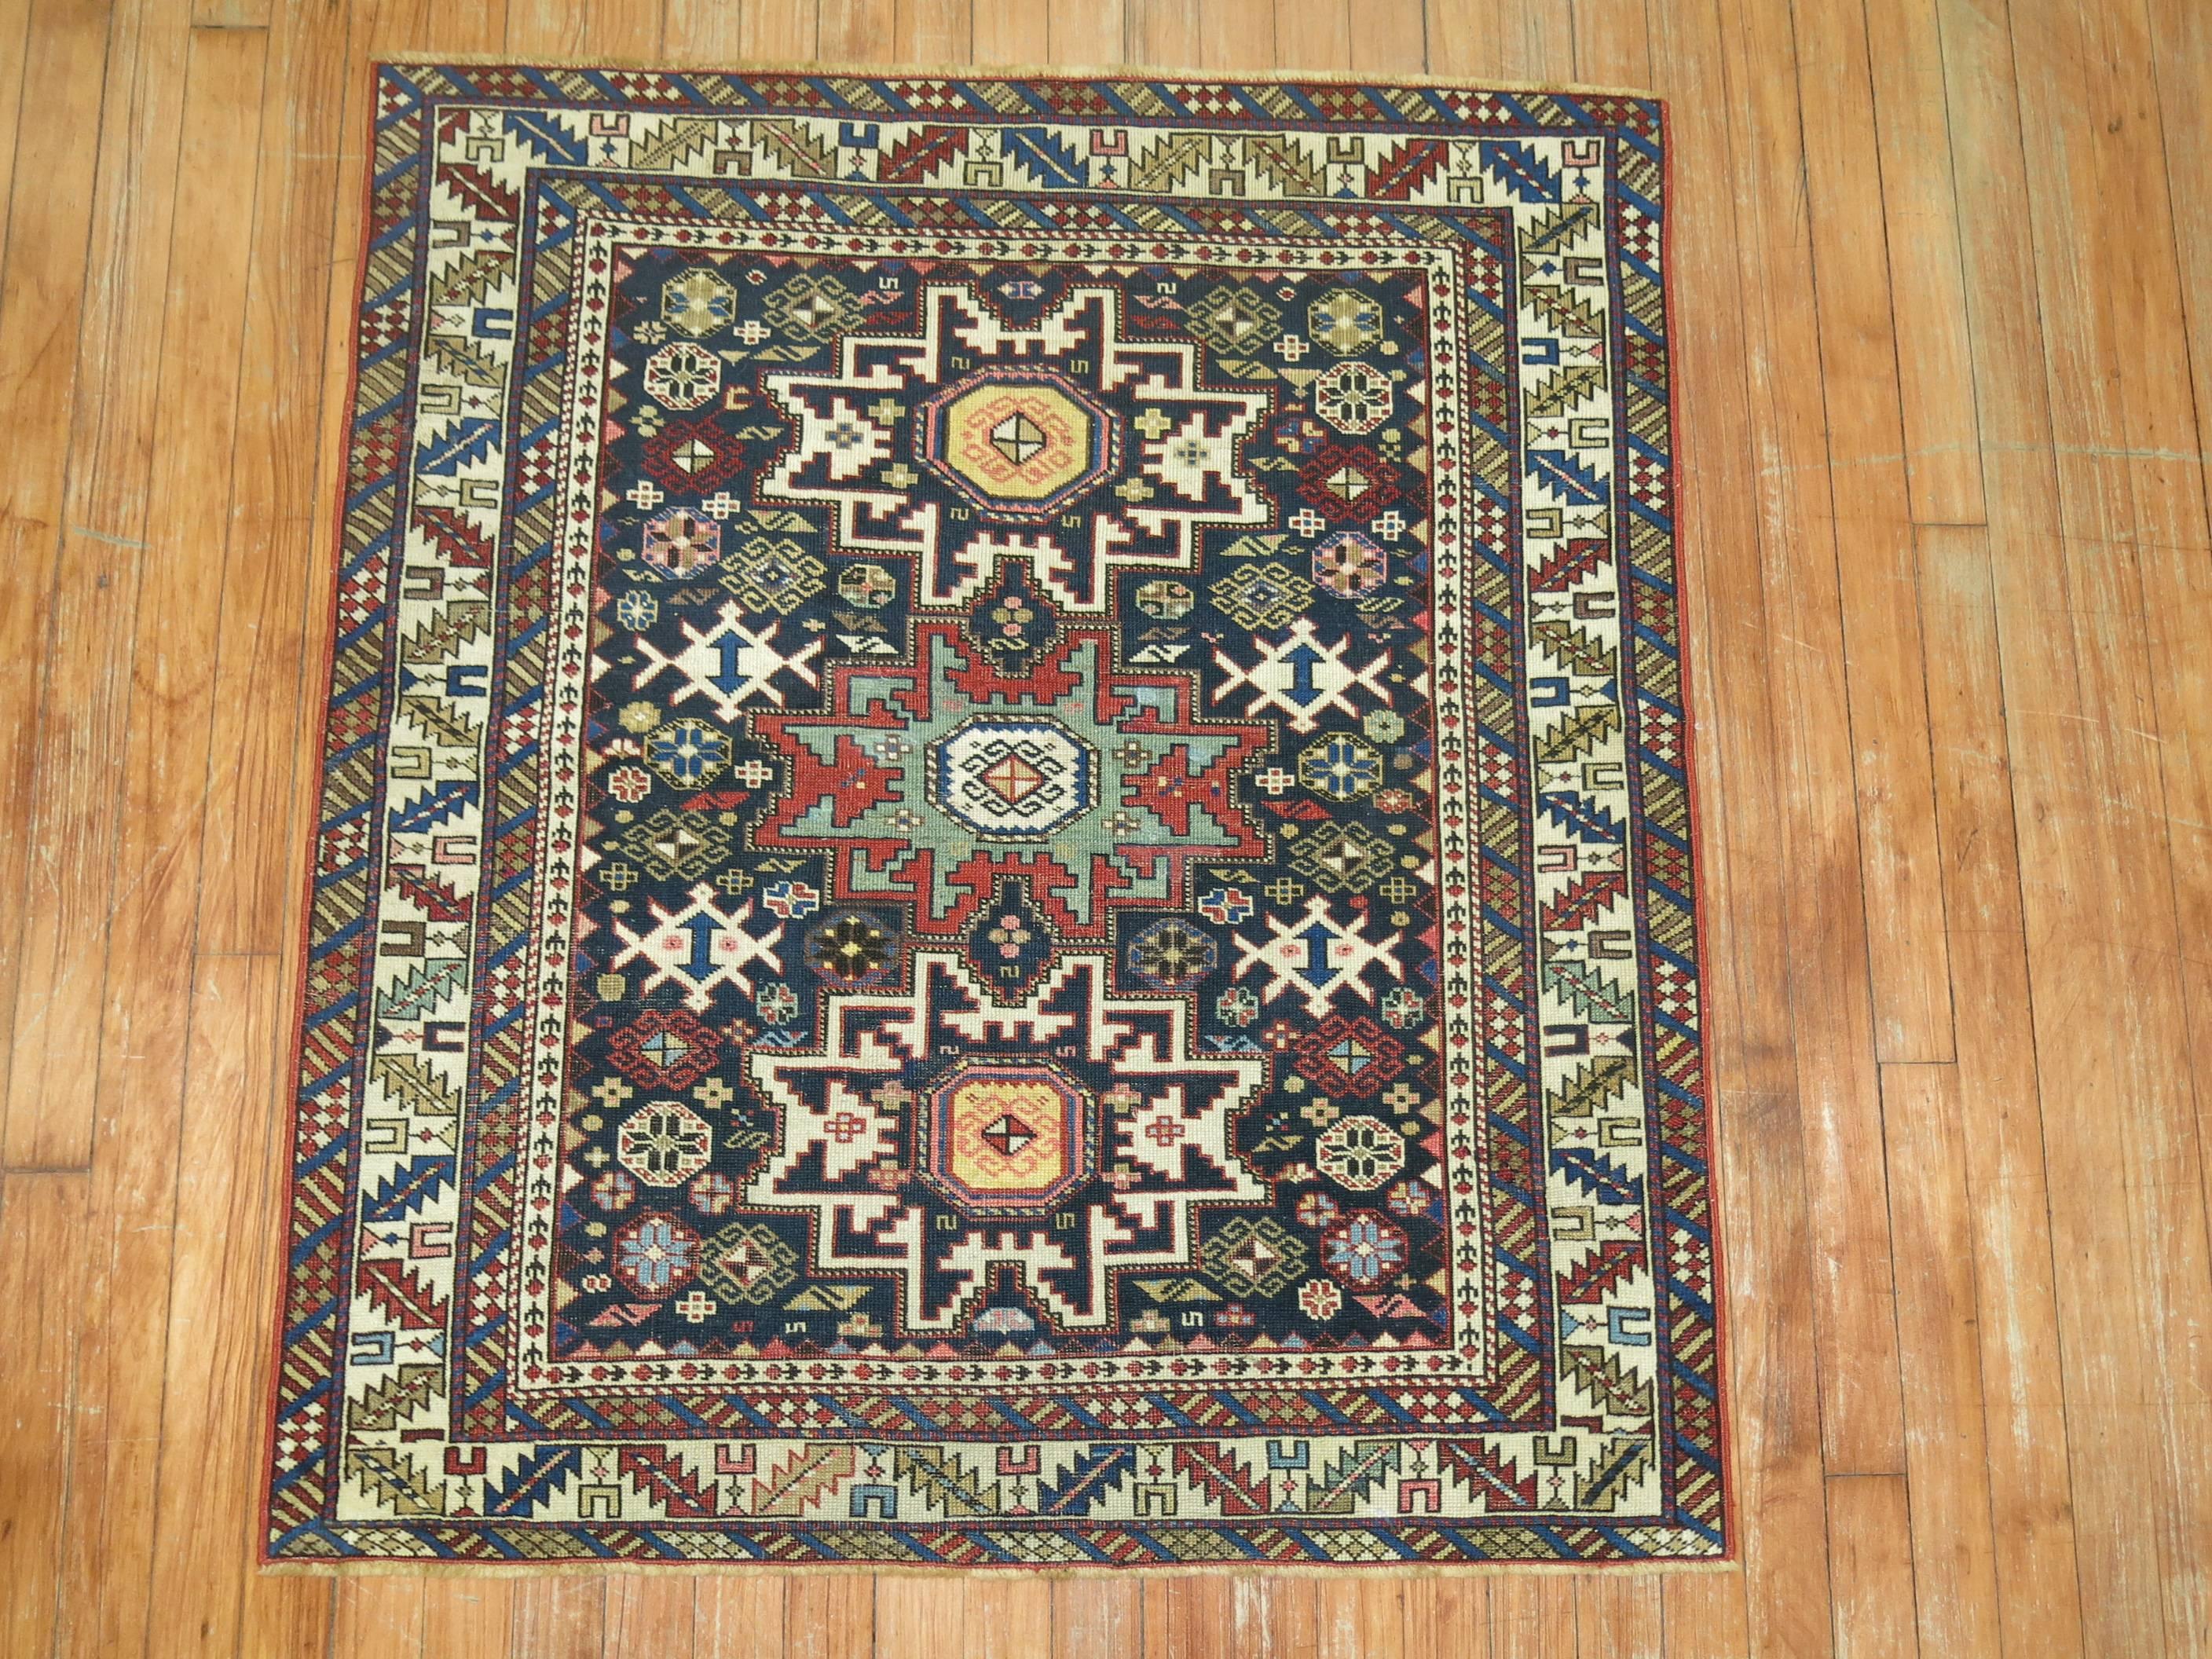 Rare size early 20th century antique Caucasian Shirvan rug.

The Caucasian nomad wove antique carpets for his own daily use, to satisfy his singular sense of creativity and harmony. Accordingly, he put a level of care into his work which seems